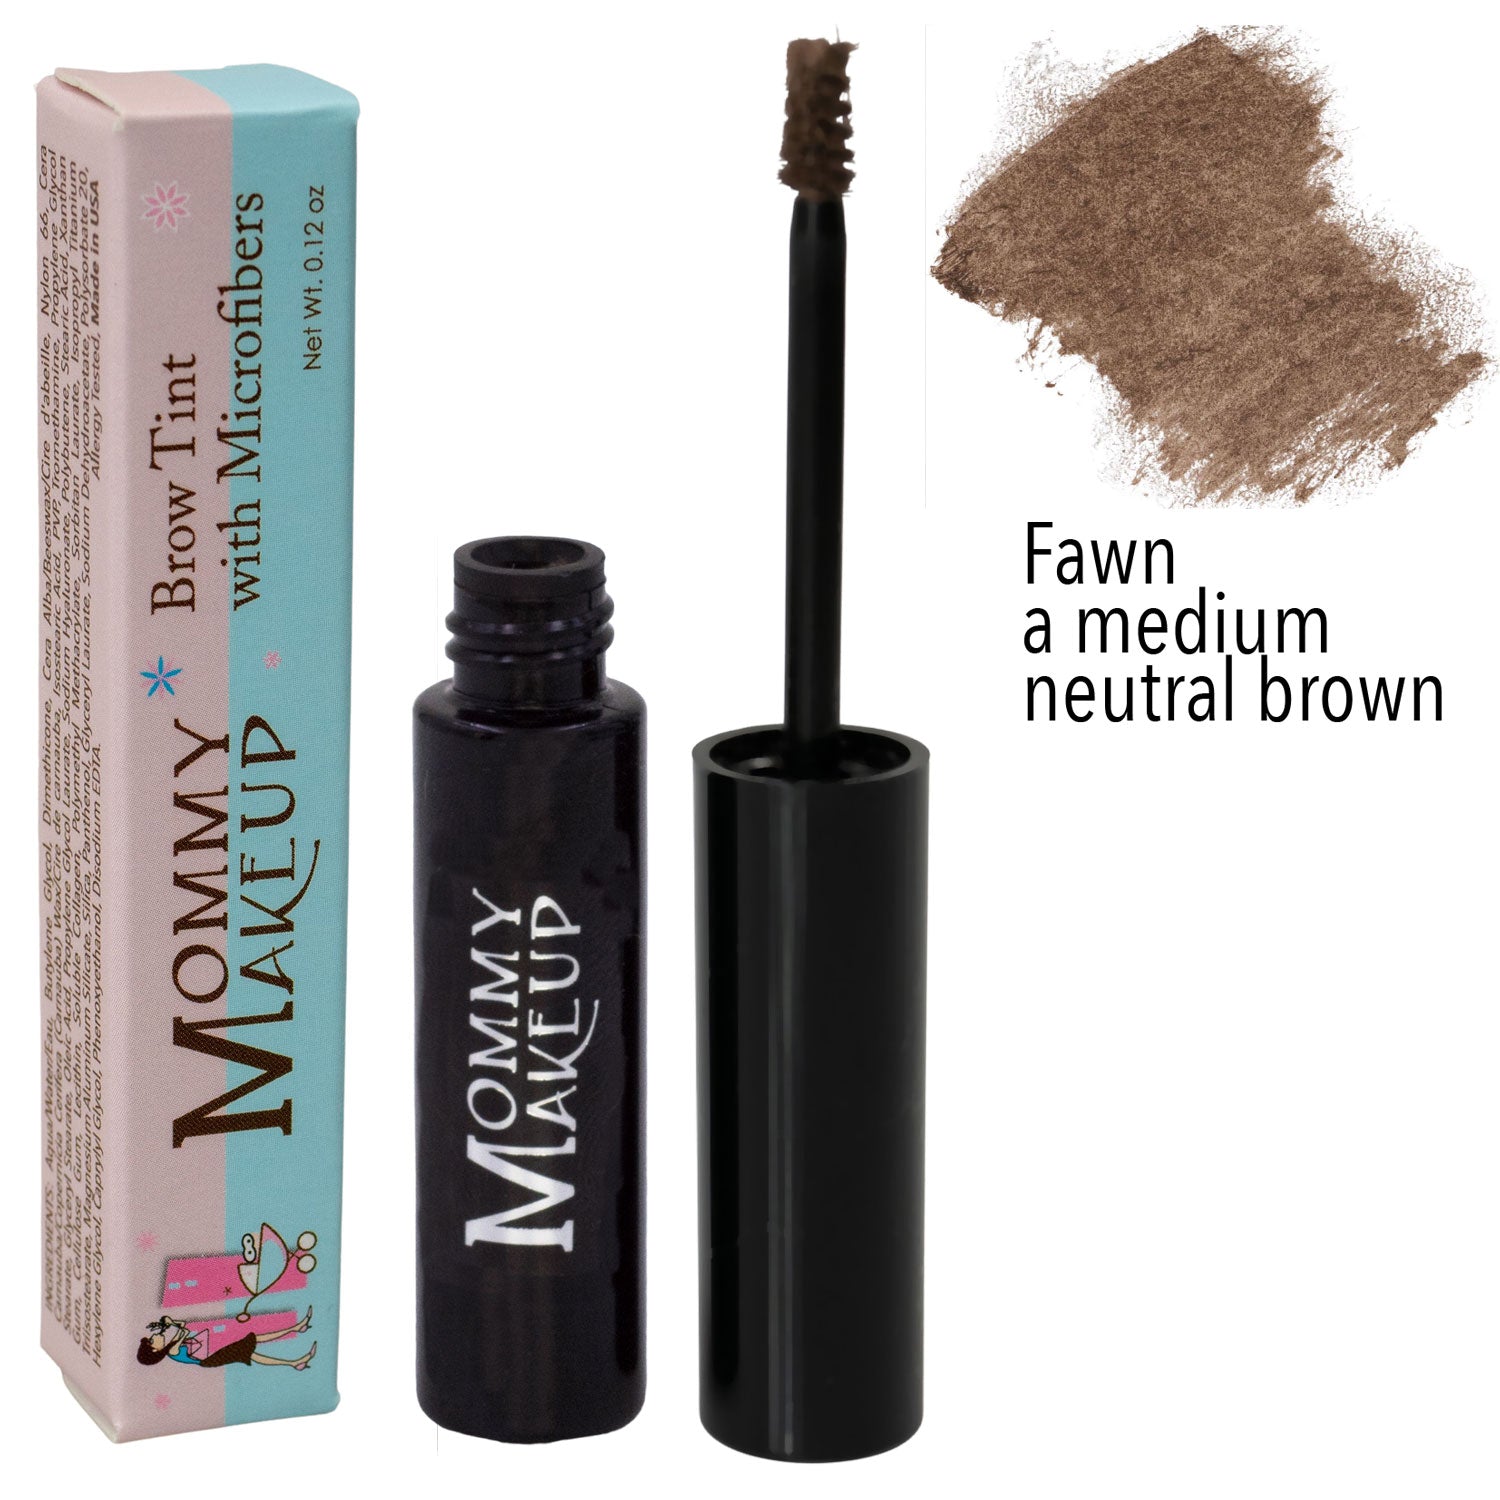 Brow Tint with Microfibers - Fawn by Mommy Makeup for a balanced and bright eye! Tinted Eyebrow Gel. Clump-free, paraben-free, talc free, allergy tested, PETA certified cruelty free.